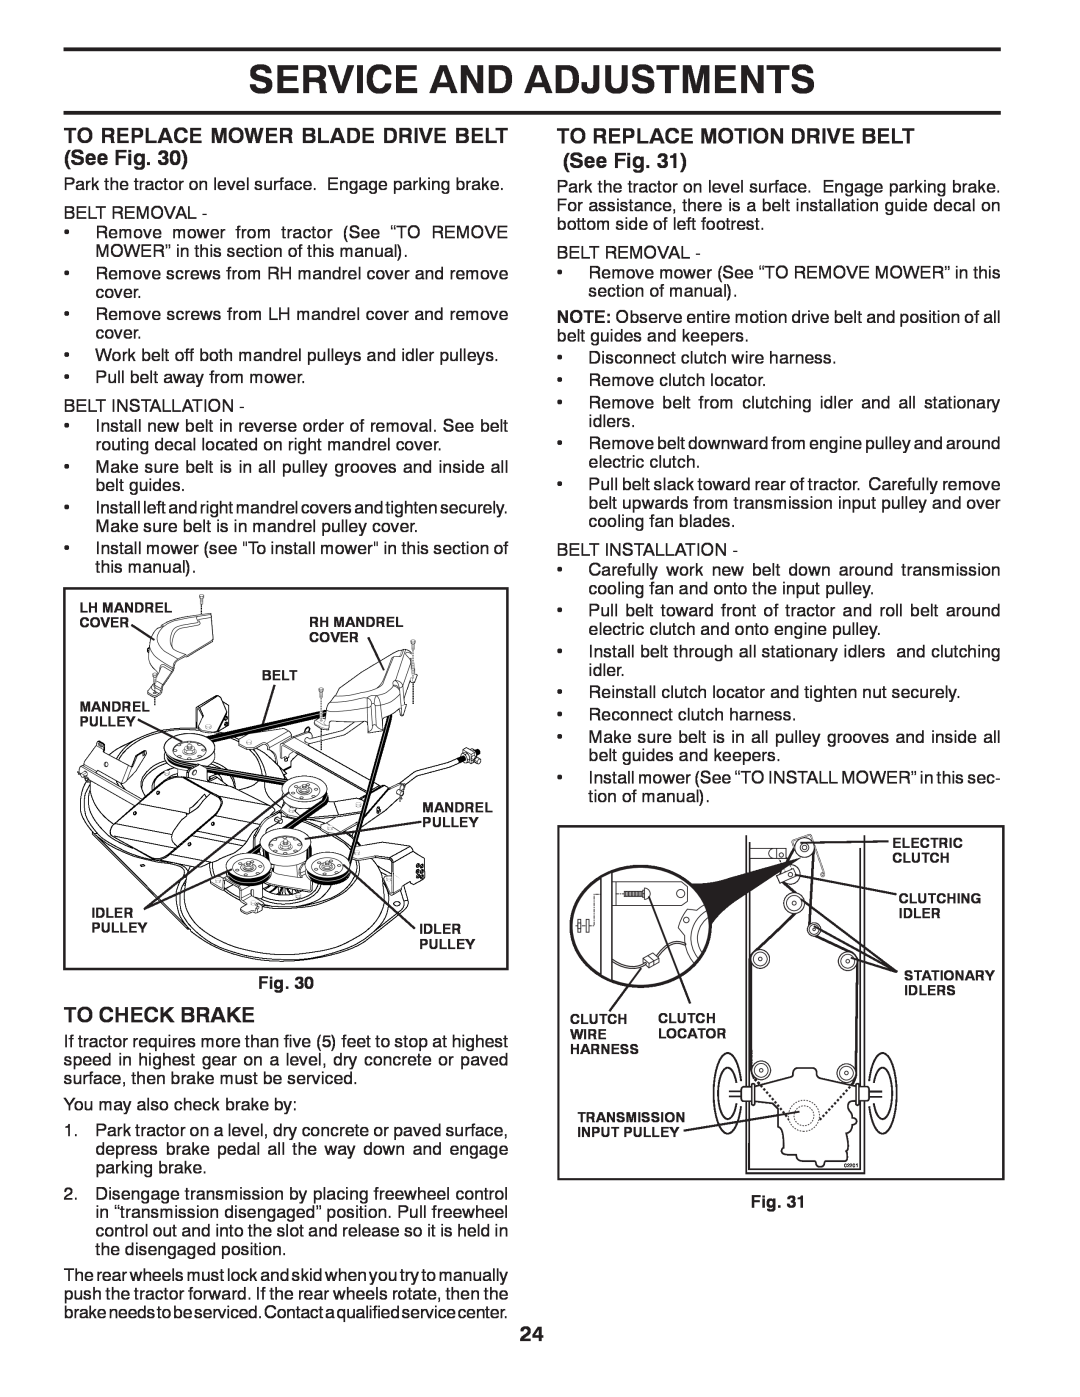 Jonsered LT2220 CMA2 manual TO REPLACE MOWER BLADE DRIVE BELT See Fig, To Check Brake, TO REPLACE MOTION DRIVE BELT See Fig 